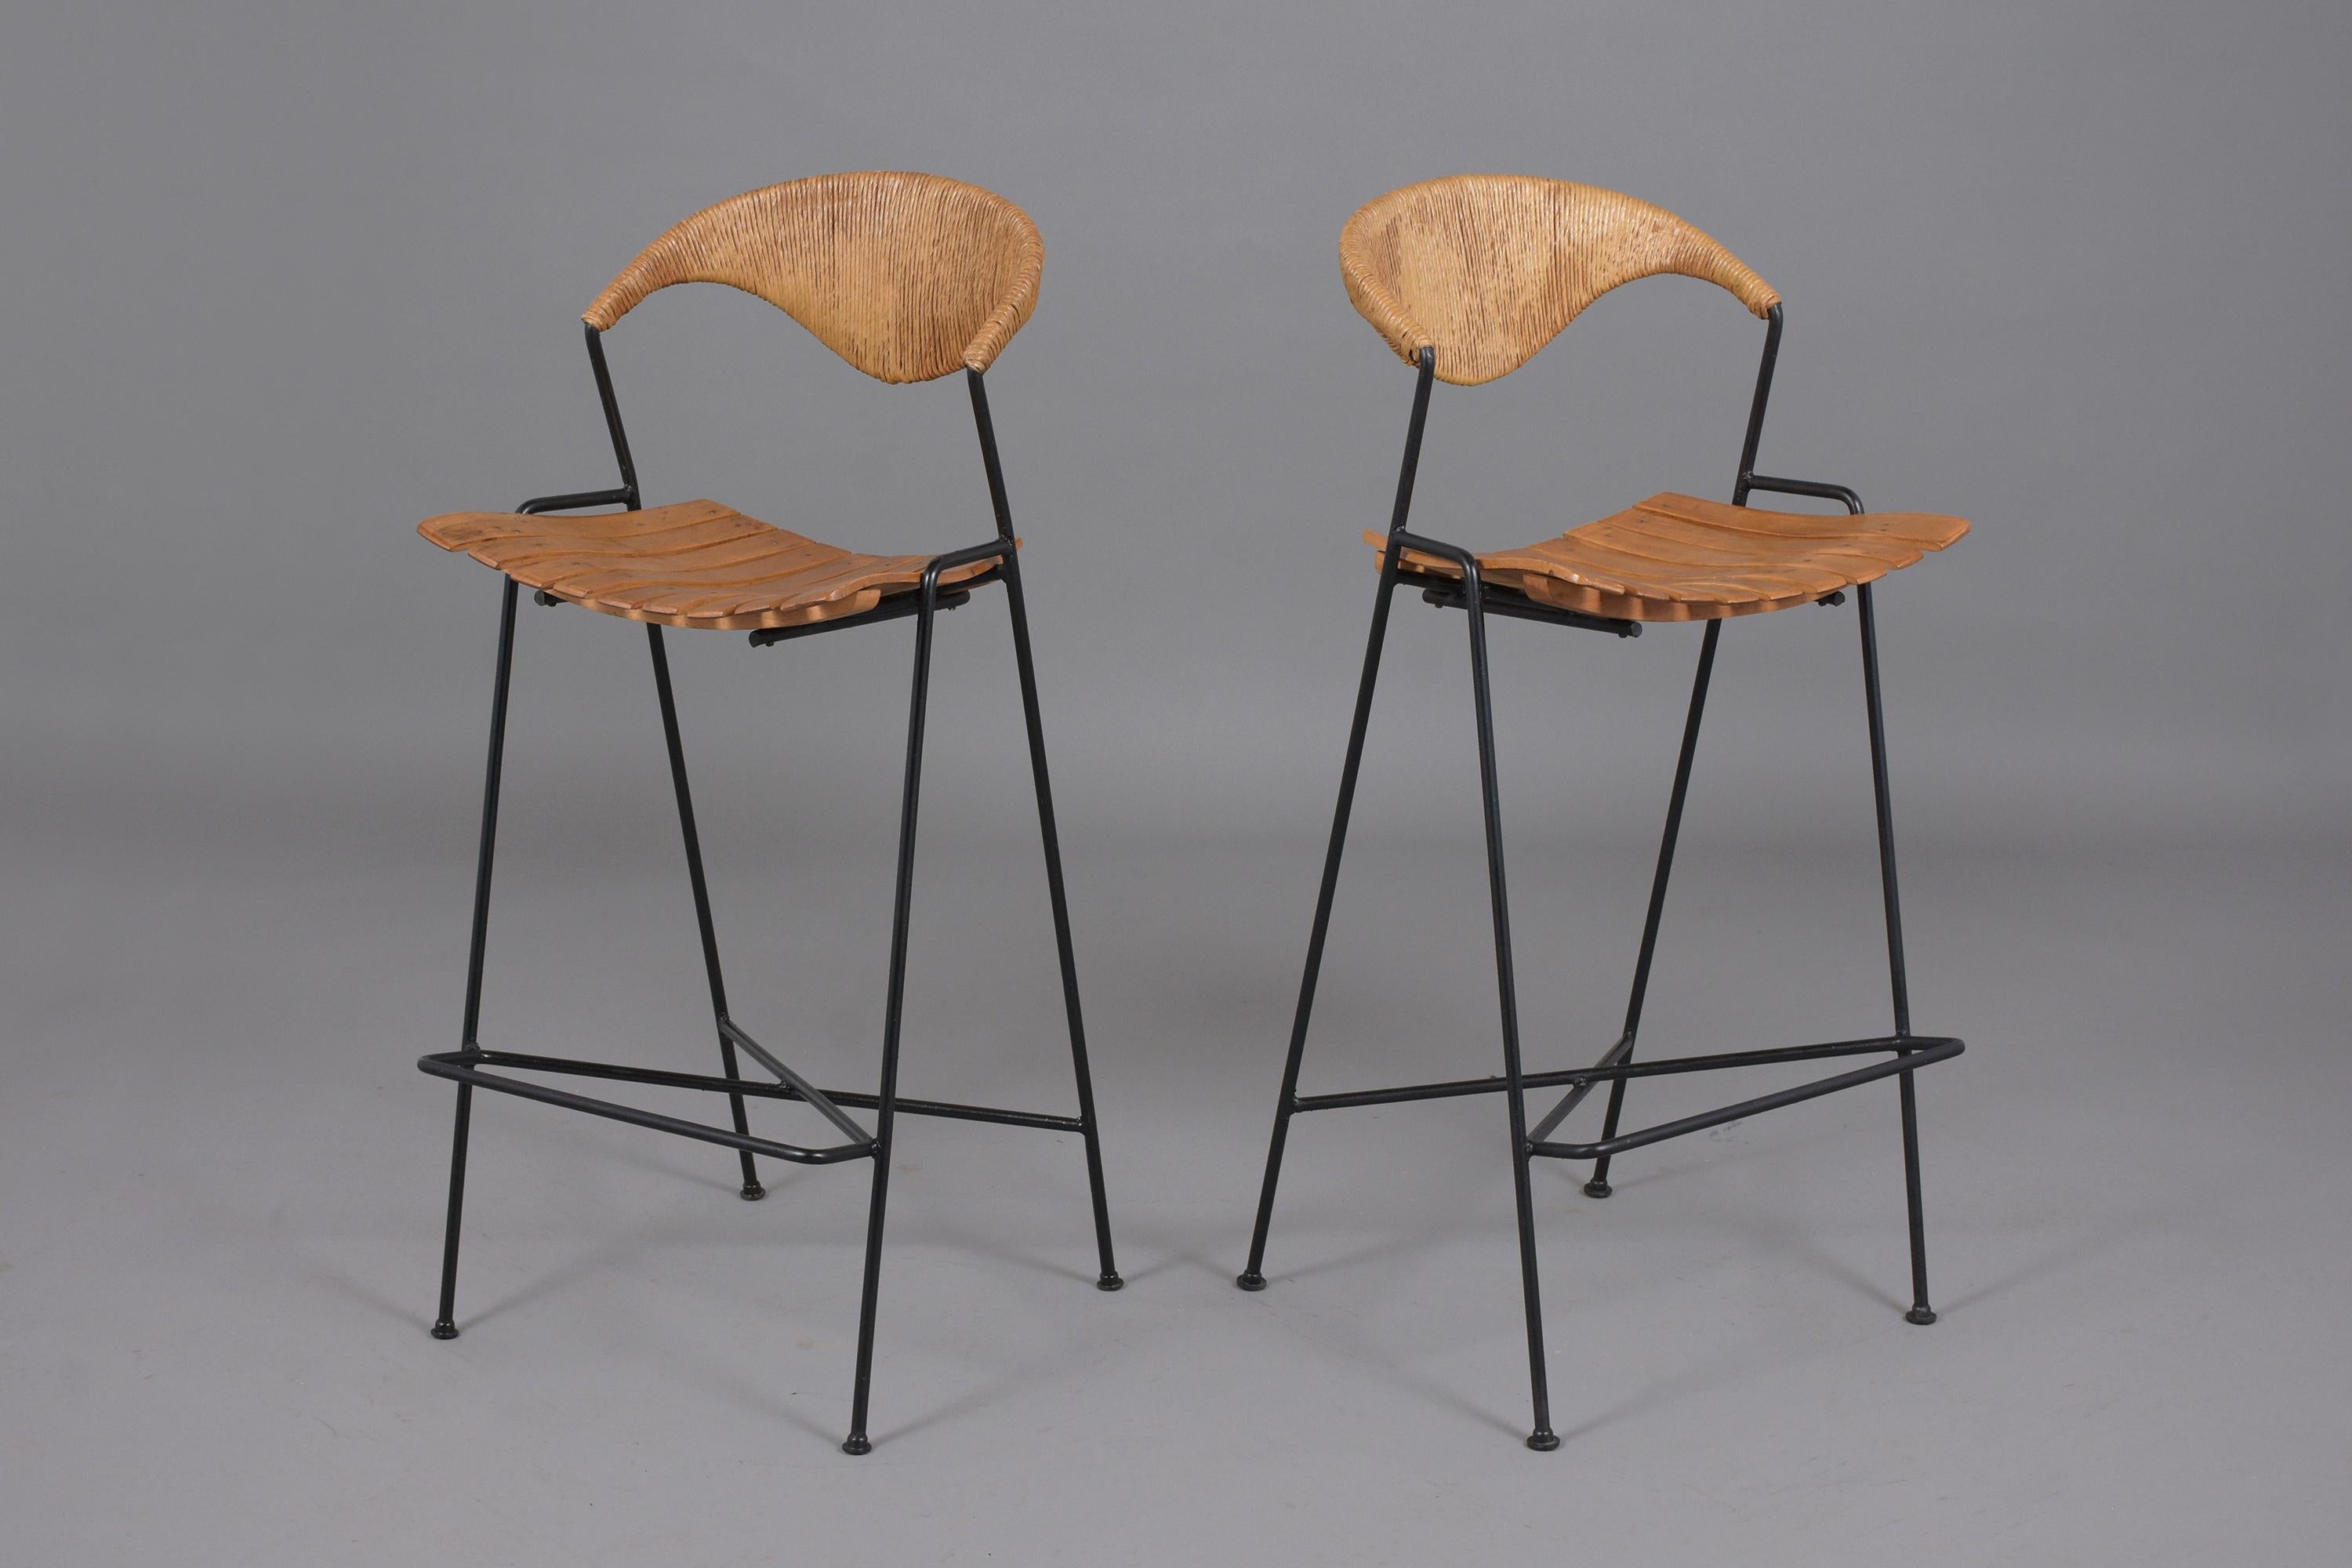 An excellent pair of Mid-Century Modern bar stools in the style of Arthur Umanoff that feature sturdy hand-crafted iron frames. This fabulous pair of barstools are in great condition, comes with backrests covered in a rush material, and wood panel